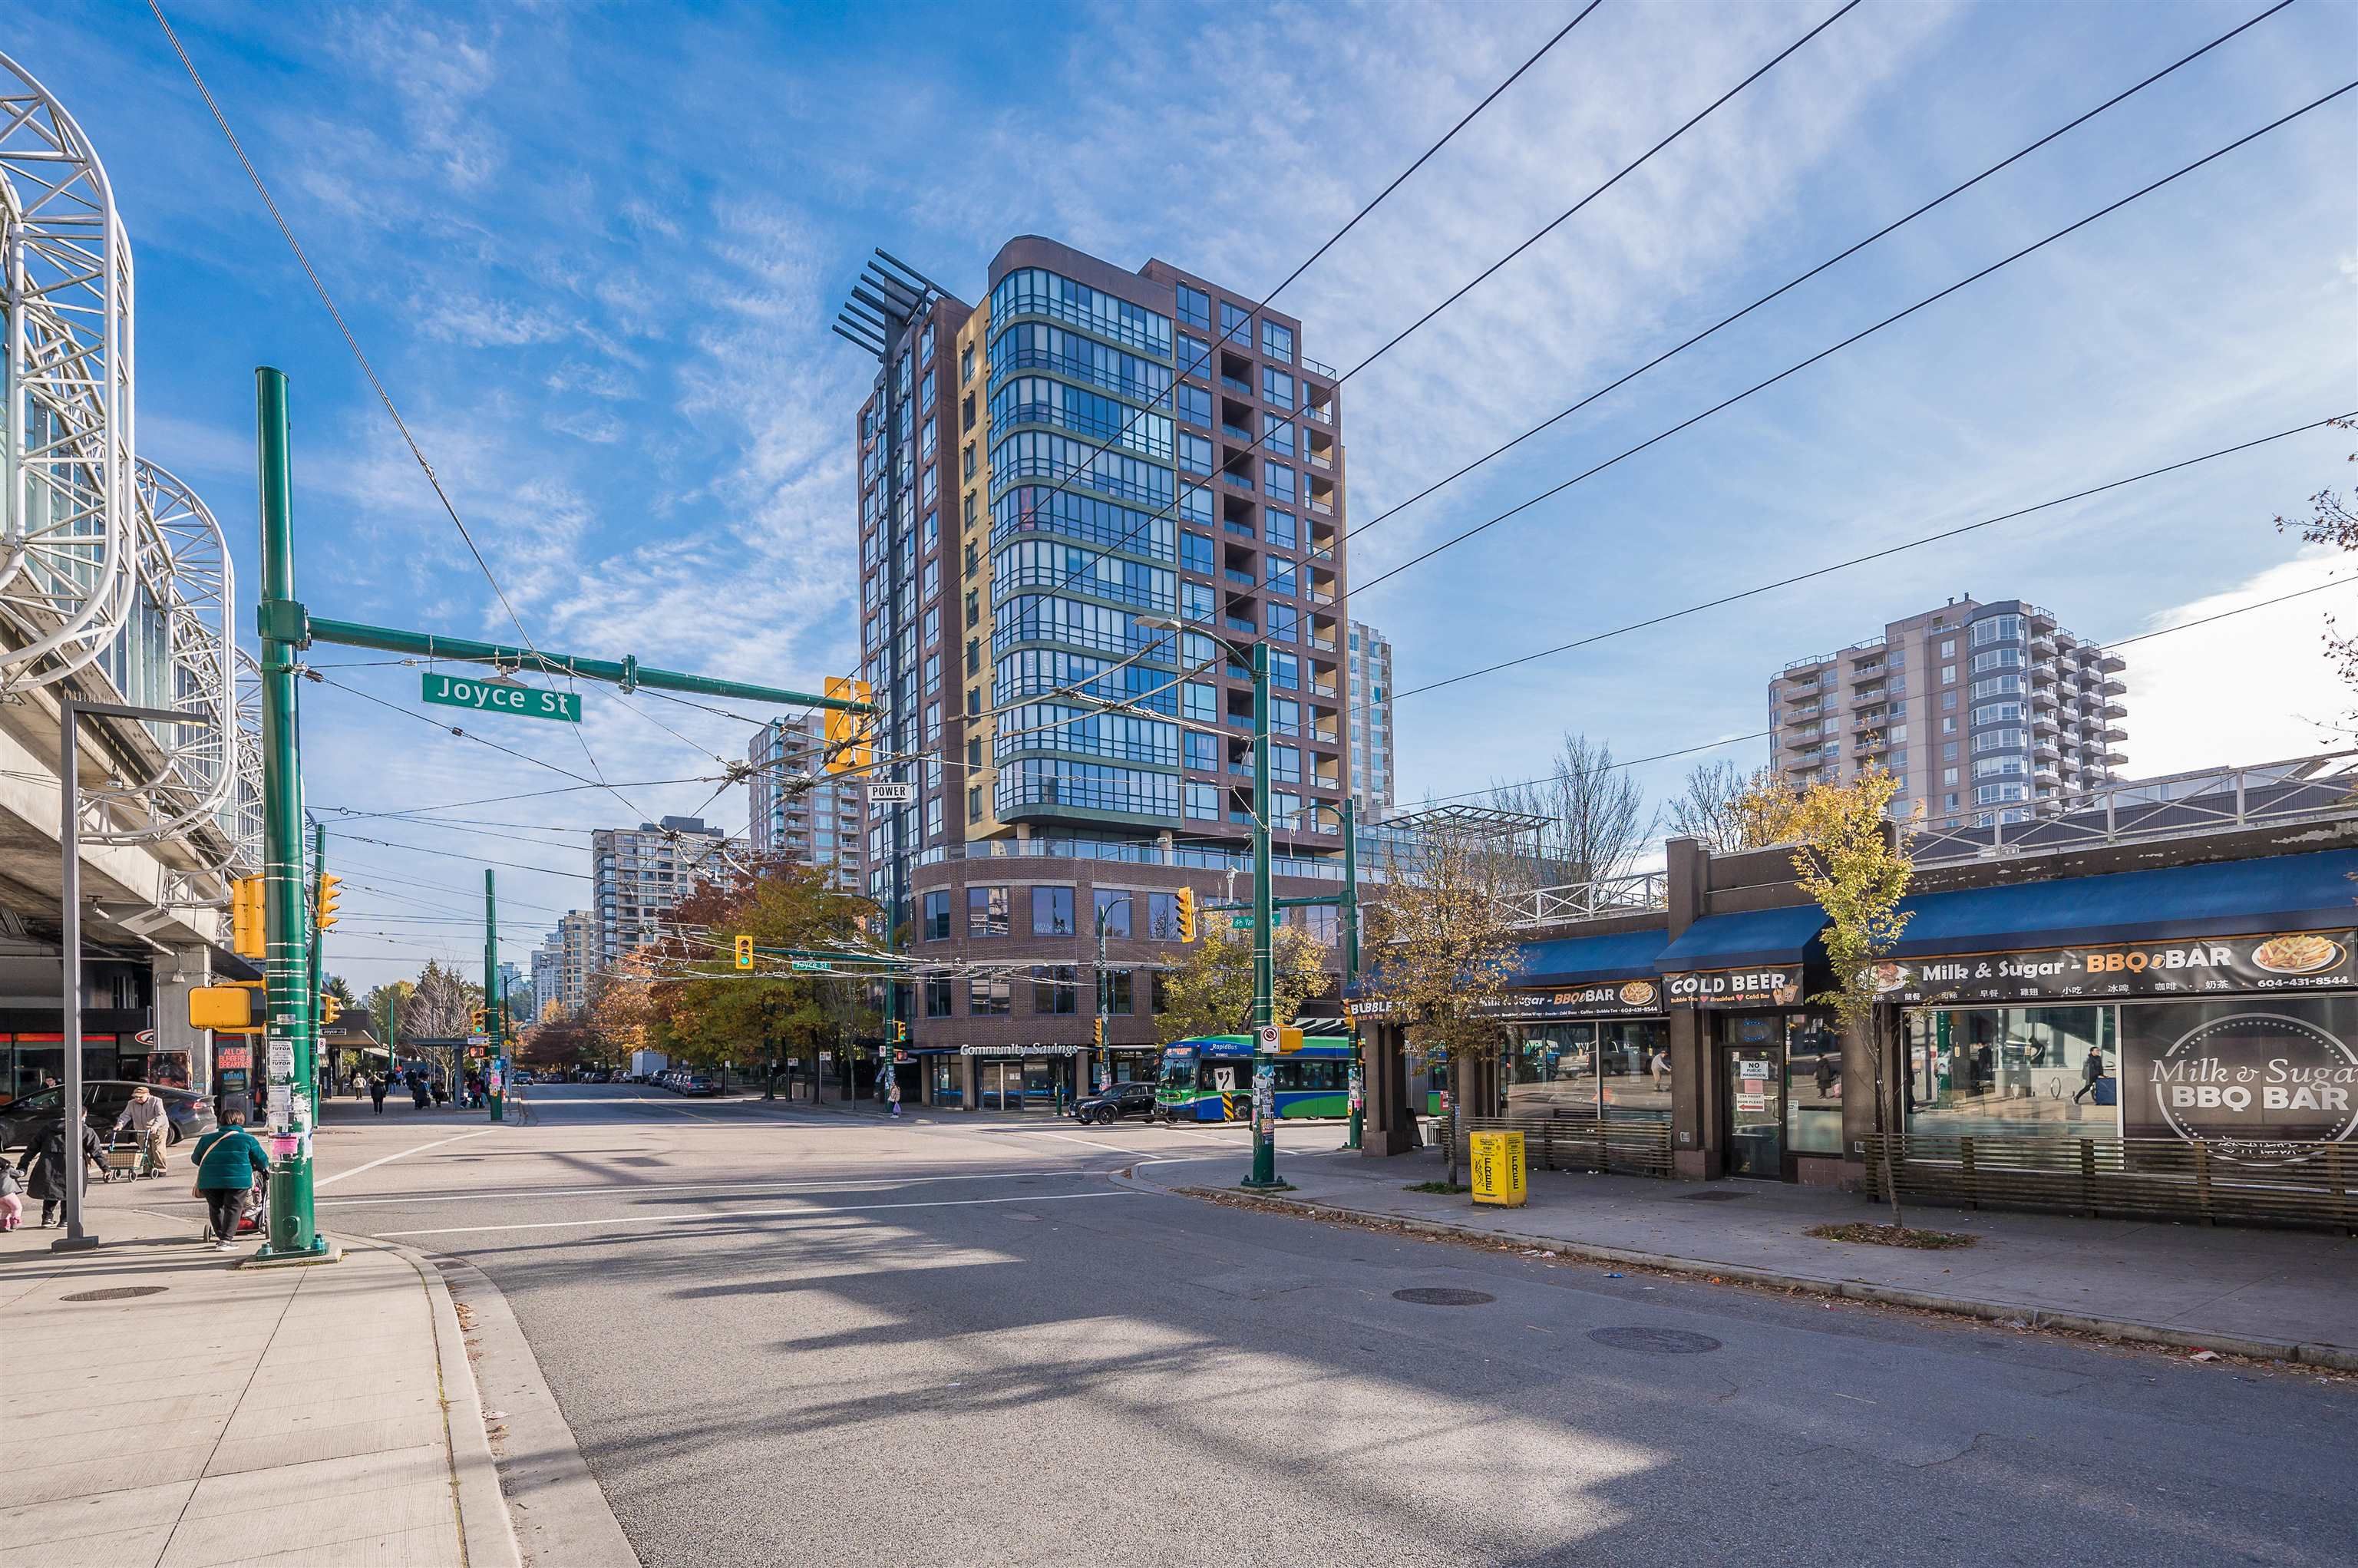 Main Photo: 5108 JOYCE STREET in VANCOUVER: Collingwood VE Office for sale (Vancouver East)  : MLS®# C8055389